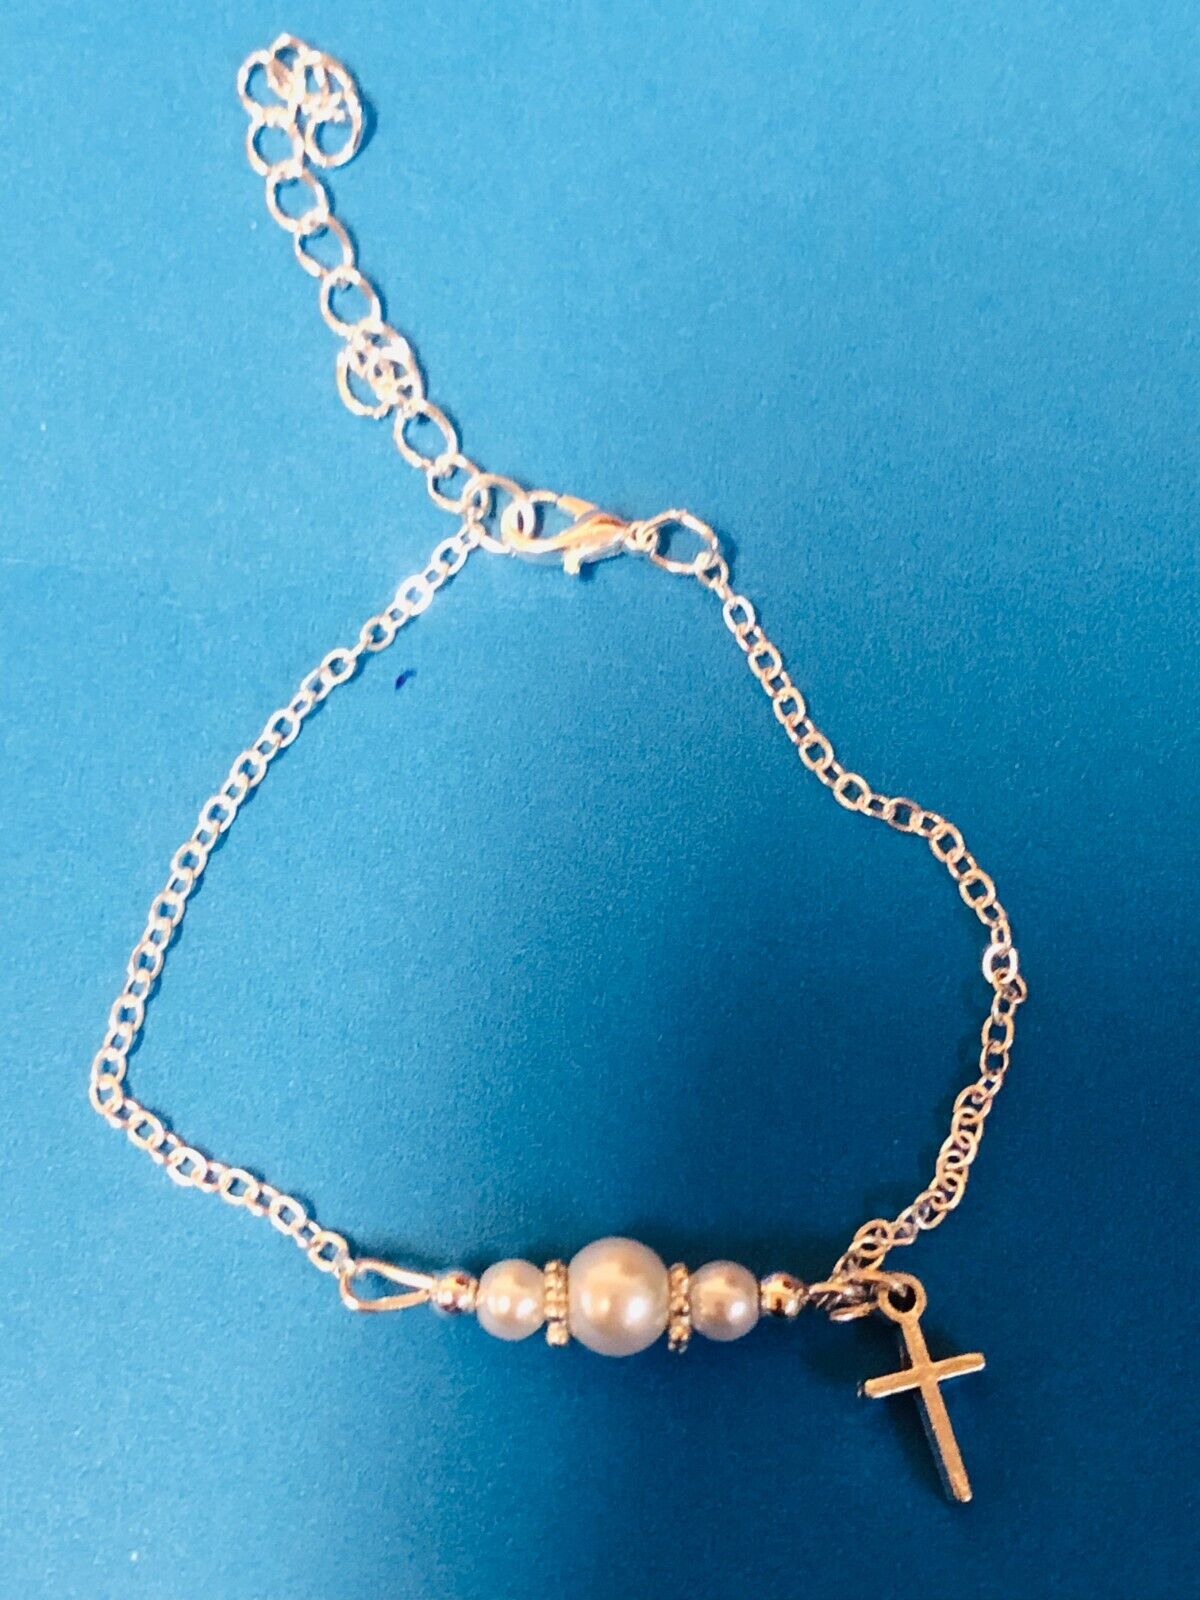 Children's Glass Pearl Bracelet with Cross Charm  7" Adjustable, New - Bob and Penny Lord